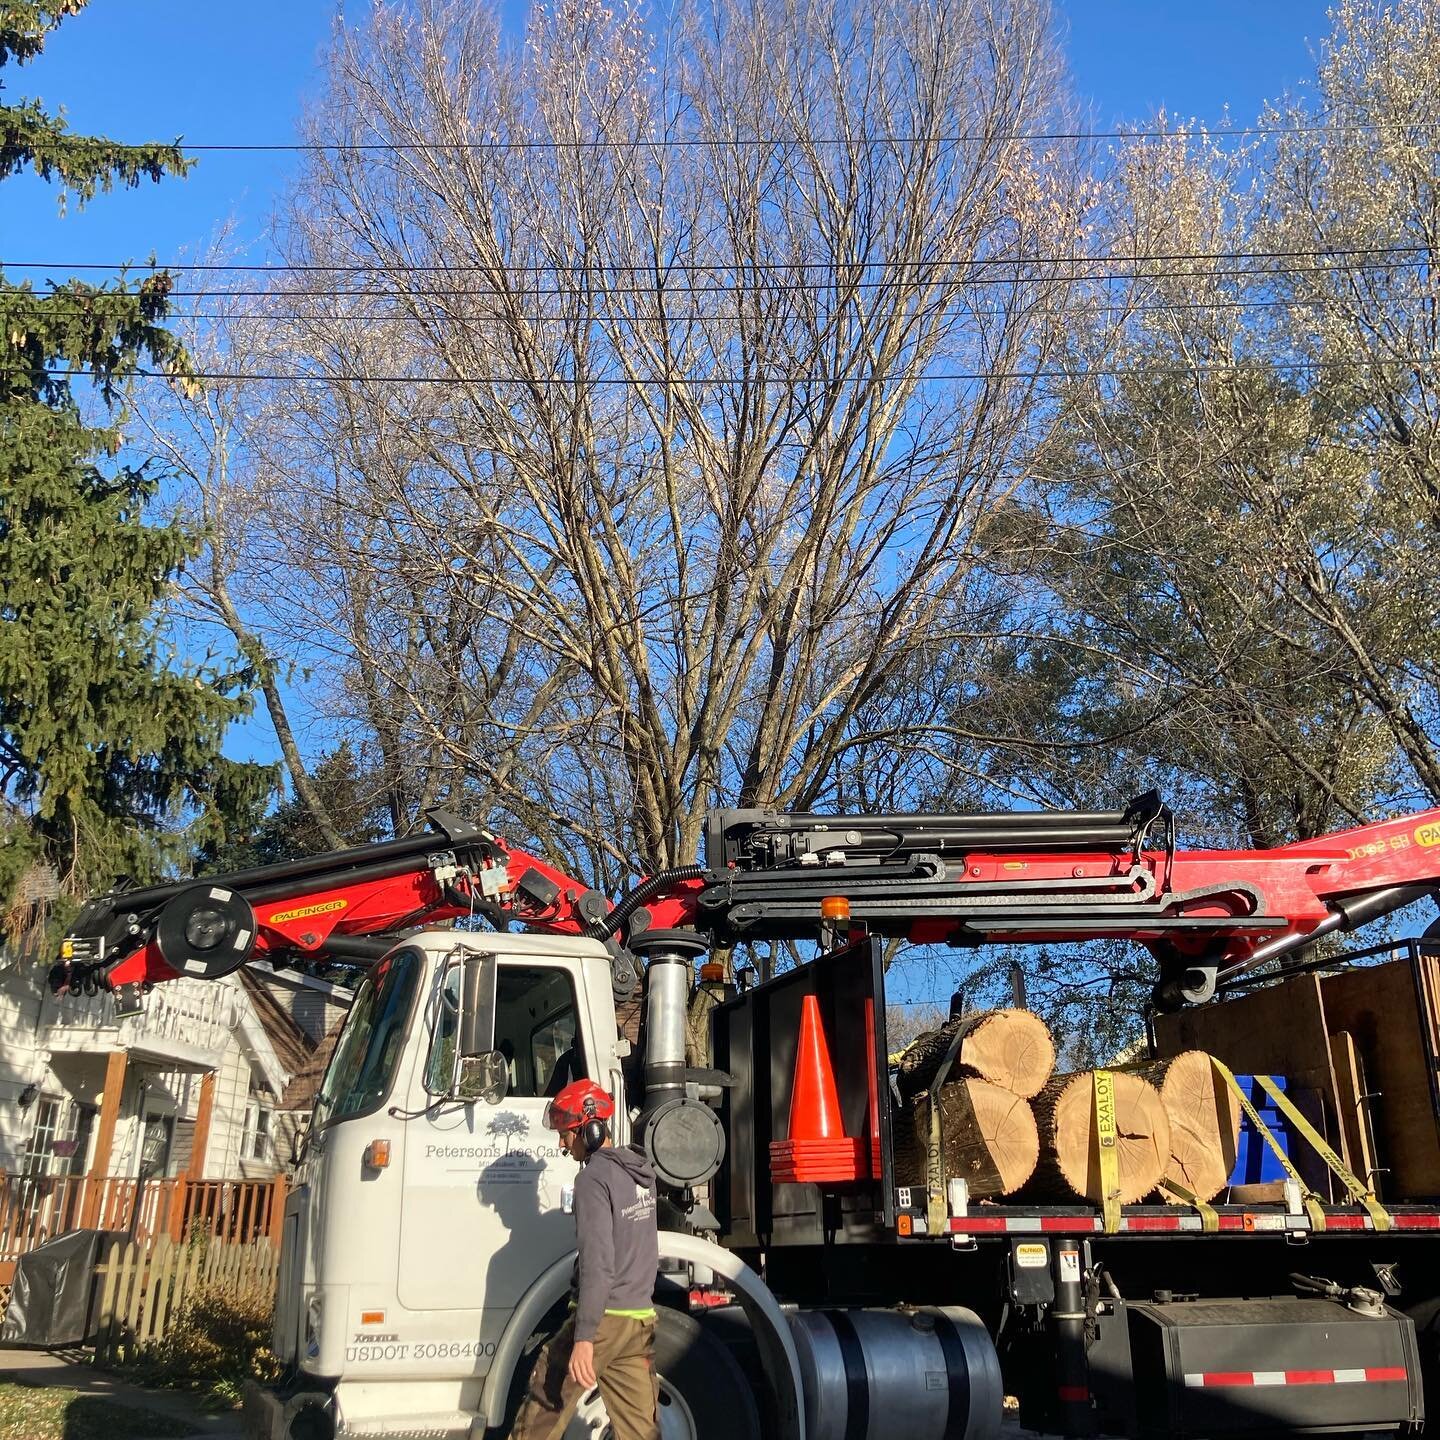 Hopefully getting into the drive was the hardest part of the day! #treemek #arborist #milwaukee